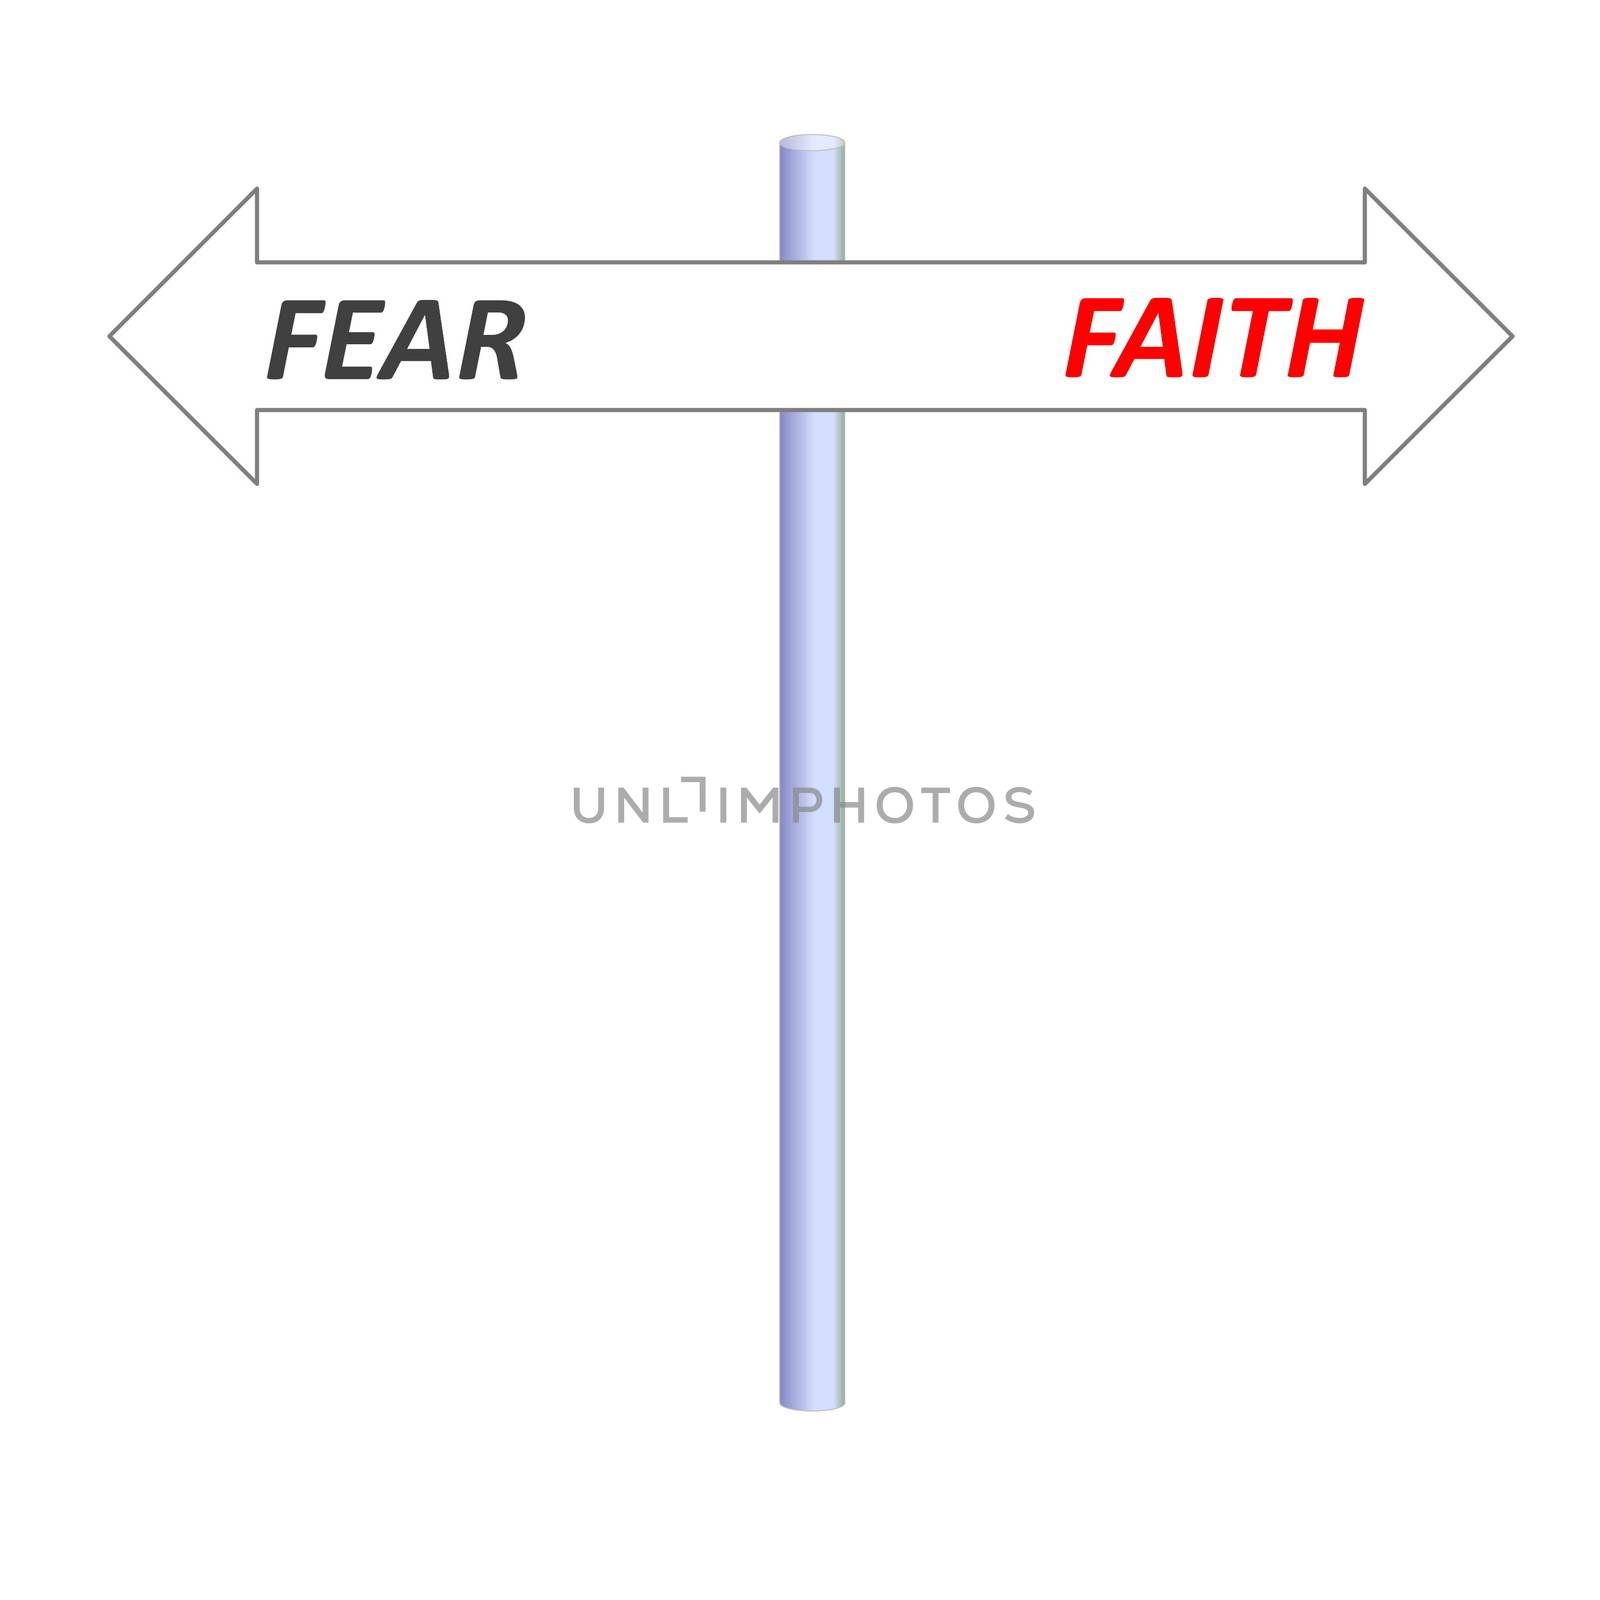 Two opposite arrows leading to faith or fear on a post in white background